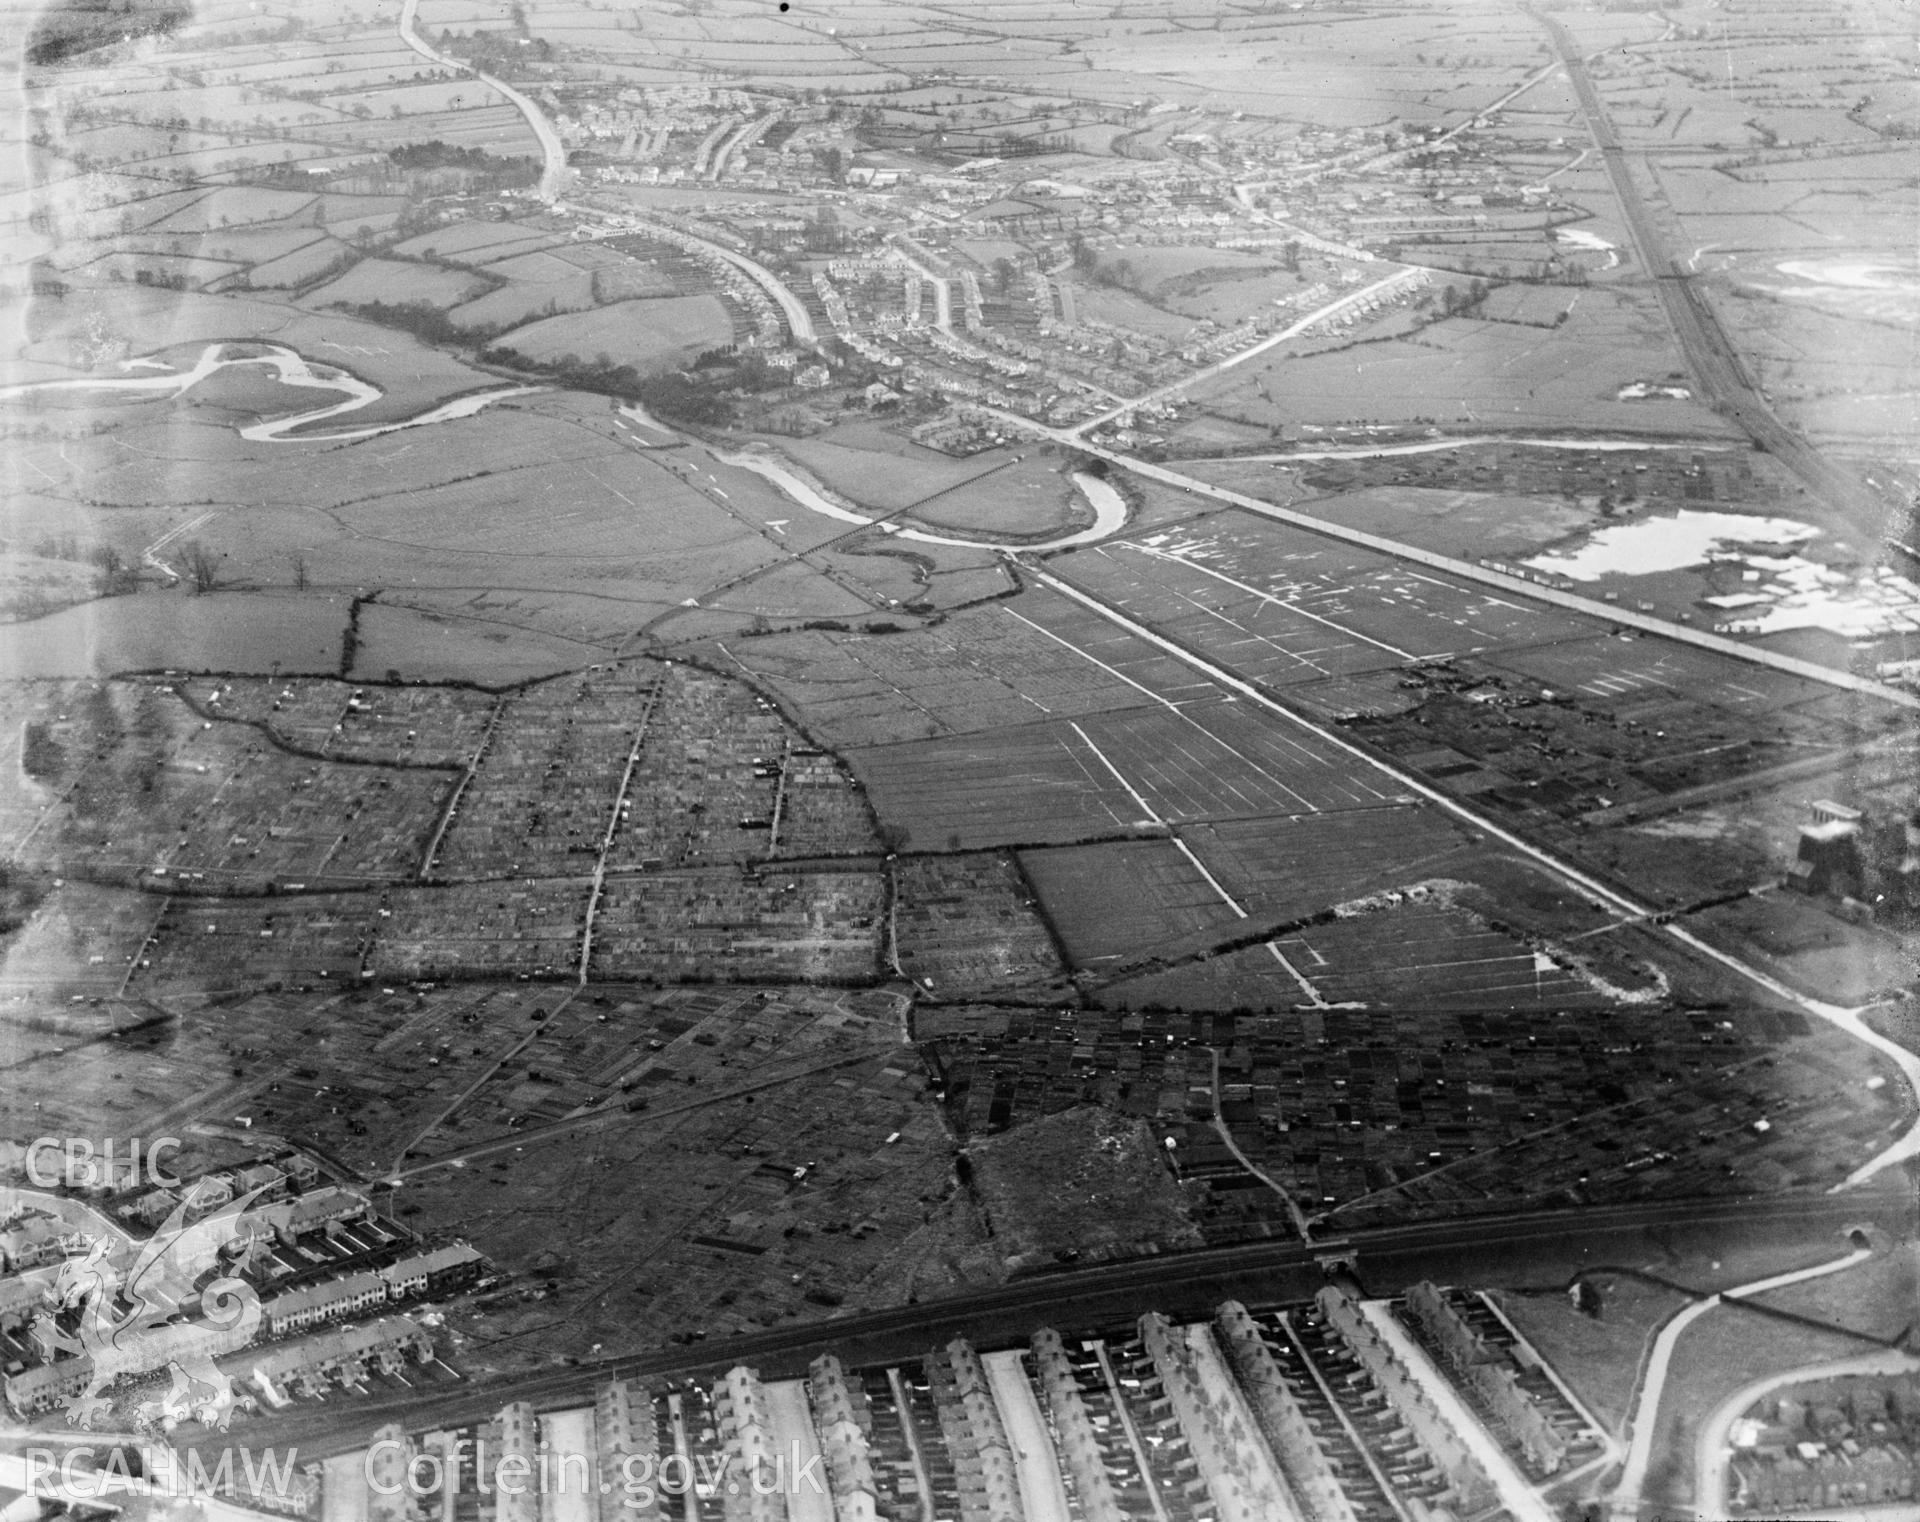 View of Cardiff showing view of Rumney and allotment gardens, oblique aerial view. 5?x4? black and white glass plate negative.